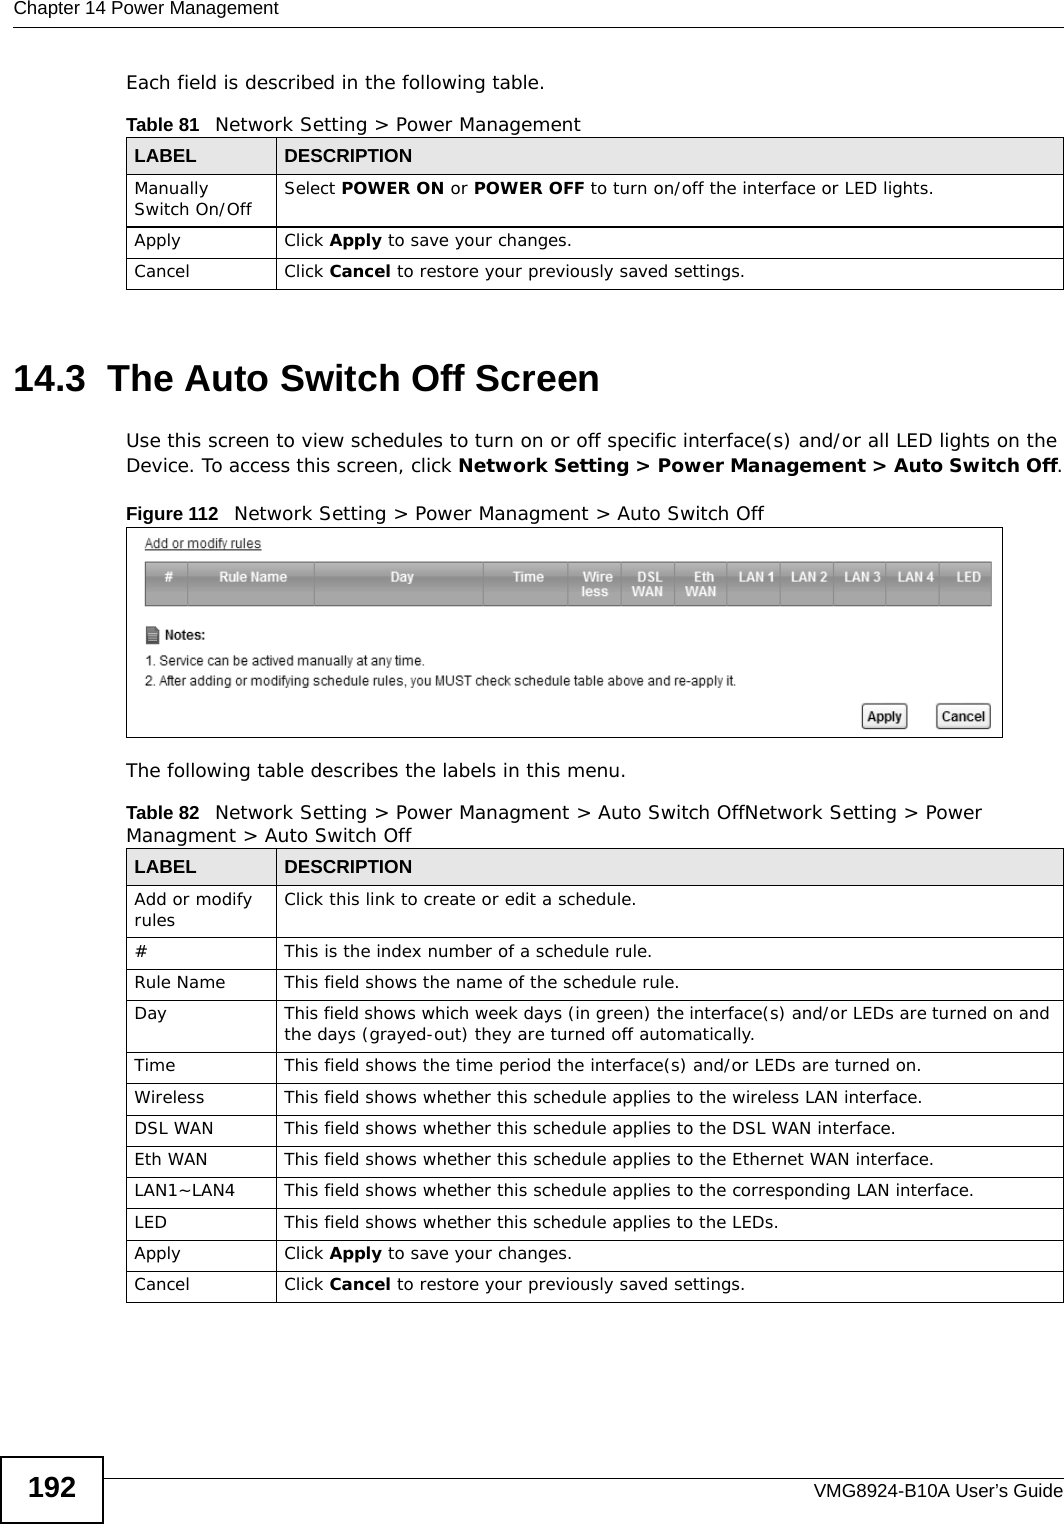 Chapter 14 Power ManagementVMG8924-B10A User’s Guide192Each field is described in the following table.14.3  The Auto Switch Off ScreenUse this screen to view schedules to turn on or off specific interface(s) and/or all LED lights on the Device. To access this screen, click Network Setting &gt; Power Management &gt; Auto Switch Off.Figure 112   Network Setting &gt; Power Managment &gt; Auto Switch Off The following table describes the labels in this menu.Table 81   Network Setting &gt; Power ManagementLABEL DESCRIPTIONManually Switch On/Off Select POWER ON or POWER OFF to turn on/off the interface or LED lights.Apply Click Apply to save your changes.Cancel Click Cancel to restore your previously saved settings.Table 82   Network Setting &gt; Power Managment &gt; Auto Switch OffNetwork Setting &gt; Power Managment &gt; Auto Switch OffLABEL DESCRIPTIONAdd or modify rules Click this link to create or edit a schedule.#This is the index number of a schedule rule.Rule Name This field shows the name of the schedule rule.Day This field shows which week days (in green) the interface(s) and/or LEDs are turned on and the days (grayed-out) they are turned off automatically.Time This field shows the time period the interface(s) and/or LEDs are turned on.Wireless This field shows whether this schedule applies to the wireless LAN interface.DSL WAN This field shows whether this schedule applies to the DSL WAN interface.Eth WAN This field shows whether this schedule applies to the Ethernet WAN interface.LAN1~LAN4 This field shows whether this schedule applies to the corresponding LAN interface.LED This field shows whether this schedule applies to the LEDs.Apply Click Apply to save your changes.Cancel Click Cancel to restore your previously saved settings.